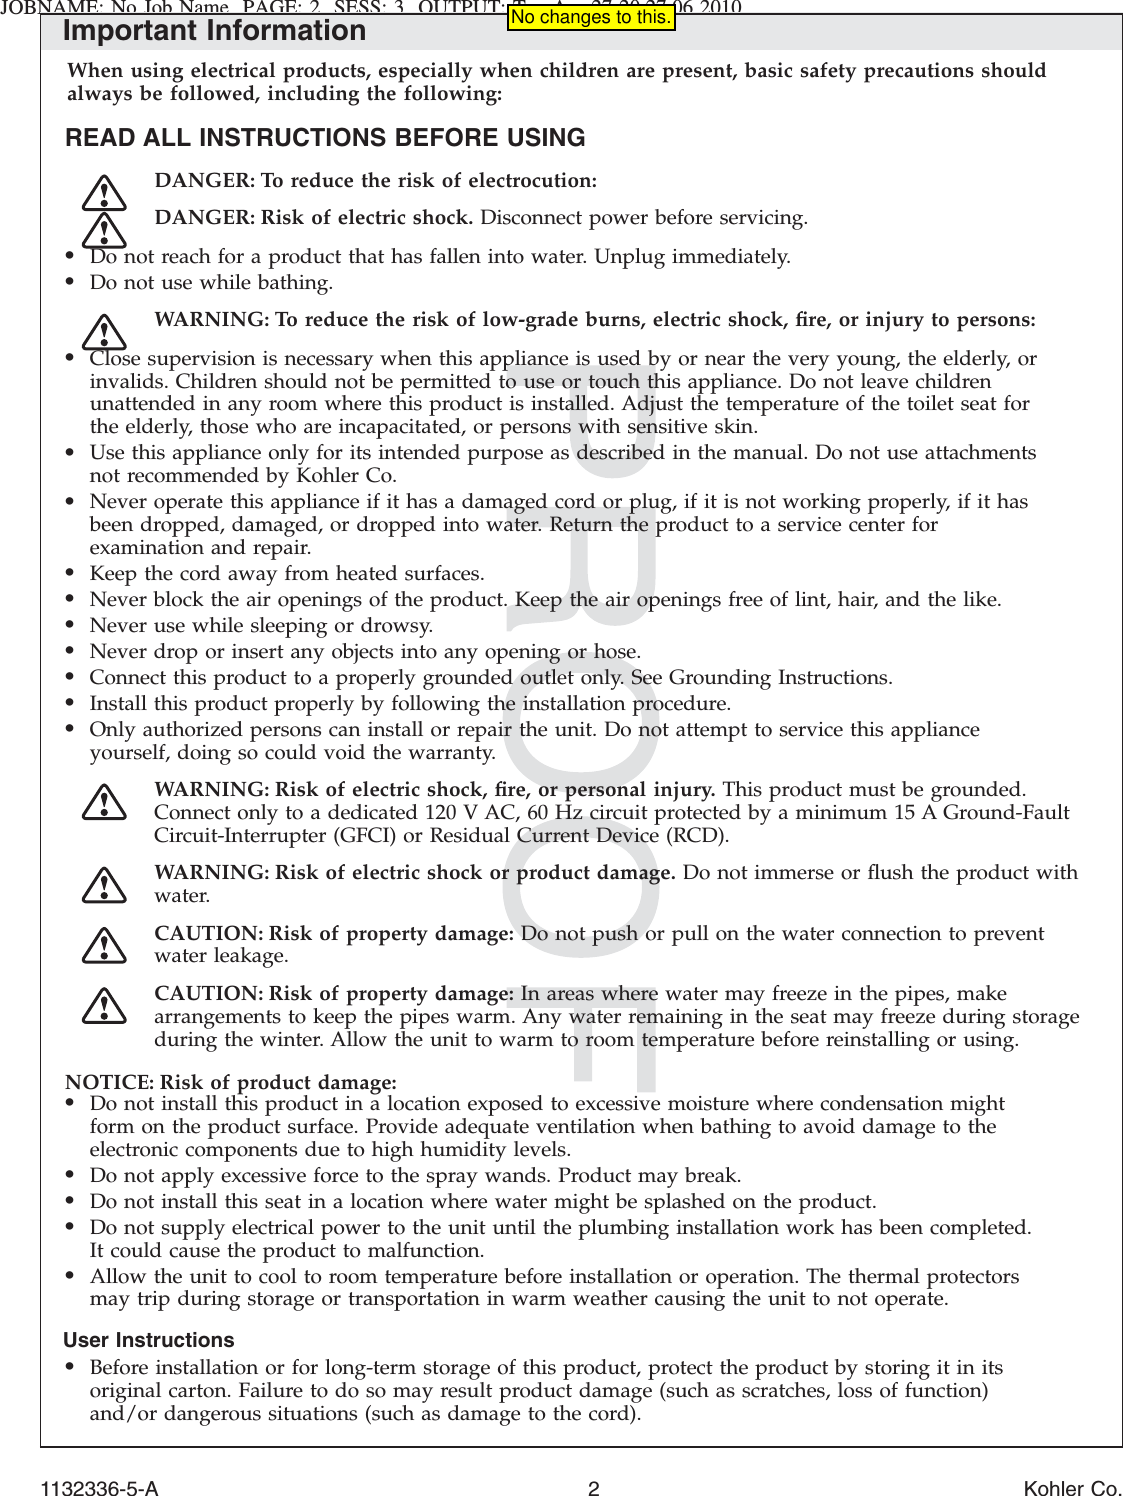 JOBNAME: No Job Name PAGE: 2 SESS: 3 OUTPUT: Tue Apr 27 20:27:06 2010Important InformationWhen using electrical products, especially when children are present, basic safety precautions shouldalways be followed, including the following:READ ALL INSTRUCTIONS BEFORE USINGDANGER: To reduce the risk of electrocution:DANGER: Risk of electric shock. Disconnect power before servicing.•Do not reach for a product that has fallen into water. Unplug immediately.•Do not use while bathing.WARNING: To reduce the risk of low-grade burns, electric shock, ﬁre, or injury to persons:•Close supervision is necessary when this appliance is used by or near the very young, the elderly, orinvalids. Children should not be permitted to use or touch this appliance. Do not leave childrenunattended in any room where this product is installed. Adjust the temperature of the toilet seat forthe elderly, those who are incapacitated, or persons with sensitive skin.•Use this appliance only for its intended purpose as described in the manual. Do not use attachmentsnot recommended by Kohler Co.•Never operate this appliance if it has a damaged cord or plug, if it is not working properly, if it hasbeen dropped, damaged, or dropped into water. Return the product to a service center forexamination and repair.•Keep the cord away from heated surfaces.•Never block the air openings of the product. Keep the air openings free of lint, hair, and the like.•Never use while sleeping or drowsy.•Never drop or insert any objects into any opening or hose.•Connect this product to a properly grounded outlet only. See Grounding Instructions.•Install this product properly by following the installation procedure.•Only authorized persons can install or repair the unit. Do not attempt to service this applianceyourself, doing so could void the warranty.WARNING: Risk of electric shock, ﬁre, or personal injury. This product must be grounded.Connect only to a dedicated 120 V AC, 60 Hz circuit protected by a minimum 15 A Ground-FaultCircuit-Interrupter (GFCI) or Residual Current Device (RCD).WARNING: Risk of electric shock or product damage. Do not immerse or ﬂush the product withwater.CAUTION: Risk of property damage: Do not push or pull on the water connection to preventwater leakage.CAUTION: Risk of property damage: In areas where water may freeze in the pipes, makearrangements to keep the pipes warm. Any water remaining in the seat may freeze during storageduring the winter. Allow the unit to warm to room temperature before reinstalling or using.NOTICE: Risk of product damage:•Do not install this product in a location exposed to excessive moisture where condensation mightform on the product surface. Provide adequate ventilation when bathing to avoid damage to theelectronic components due to high humidity levels.•Do not apply excessive force to the spray wands. Product may break.•Do not install this seat in a location where water might be splashed on the product.•Do not supply electrical power to the unit until the plumbing installation work has been completed.It could cause the product to malfunction.•Allow the unit to cool to room temperature before installation or operation. The thermal protectorsmay trip during storage or transportation in warm weather causing the unit to not operate.User Instructions•Before installation or for long-term storage of this product, protect the product by storing it in itsoriginal carton. Failure to do so may result product damage (such as scratches, loss of function)and/or dangerous situations (such as damage to the cord).1132336-5-A 2 Kohler Co.No changes to this.